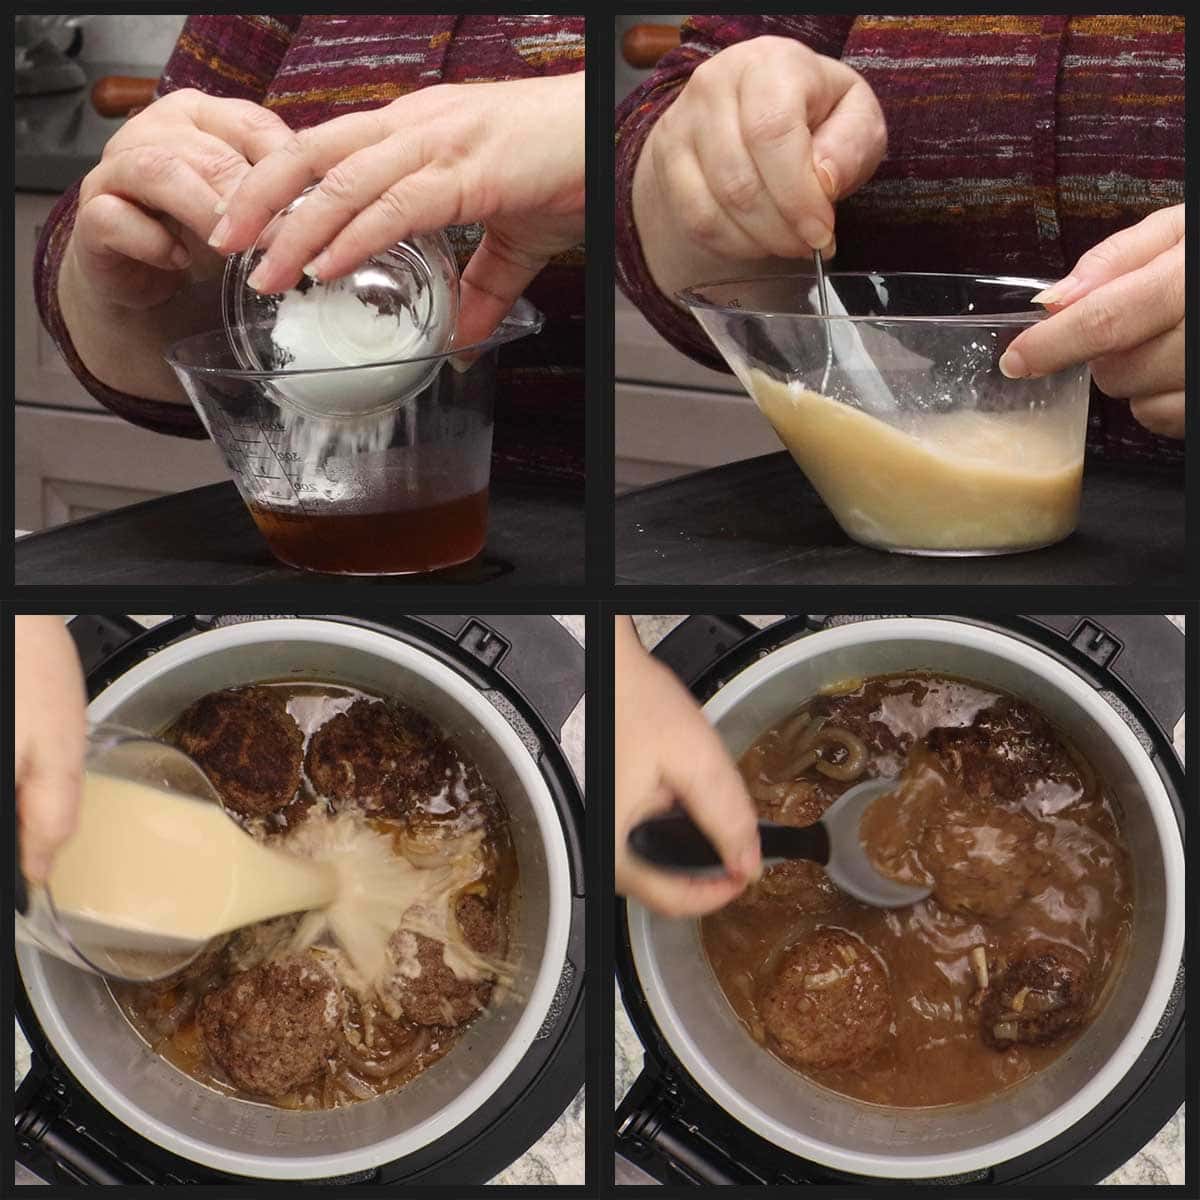 mixing up and adding the cornstarch slurry to the cooked salisbury steak.